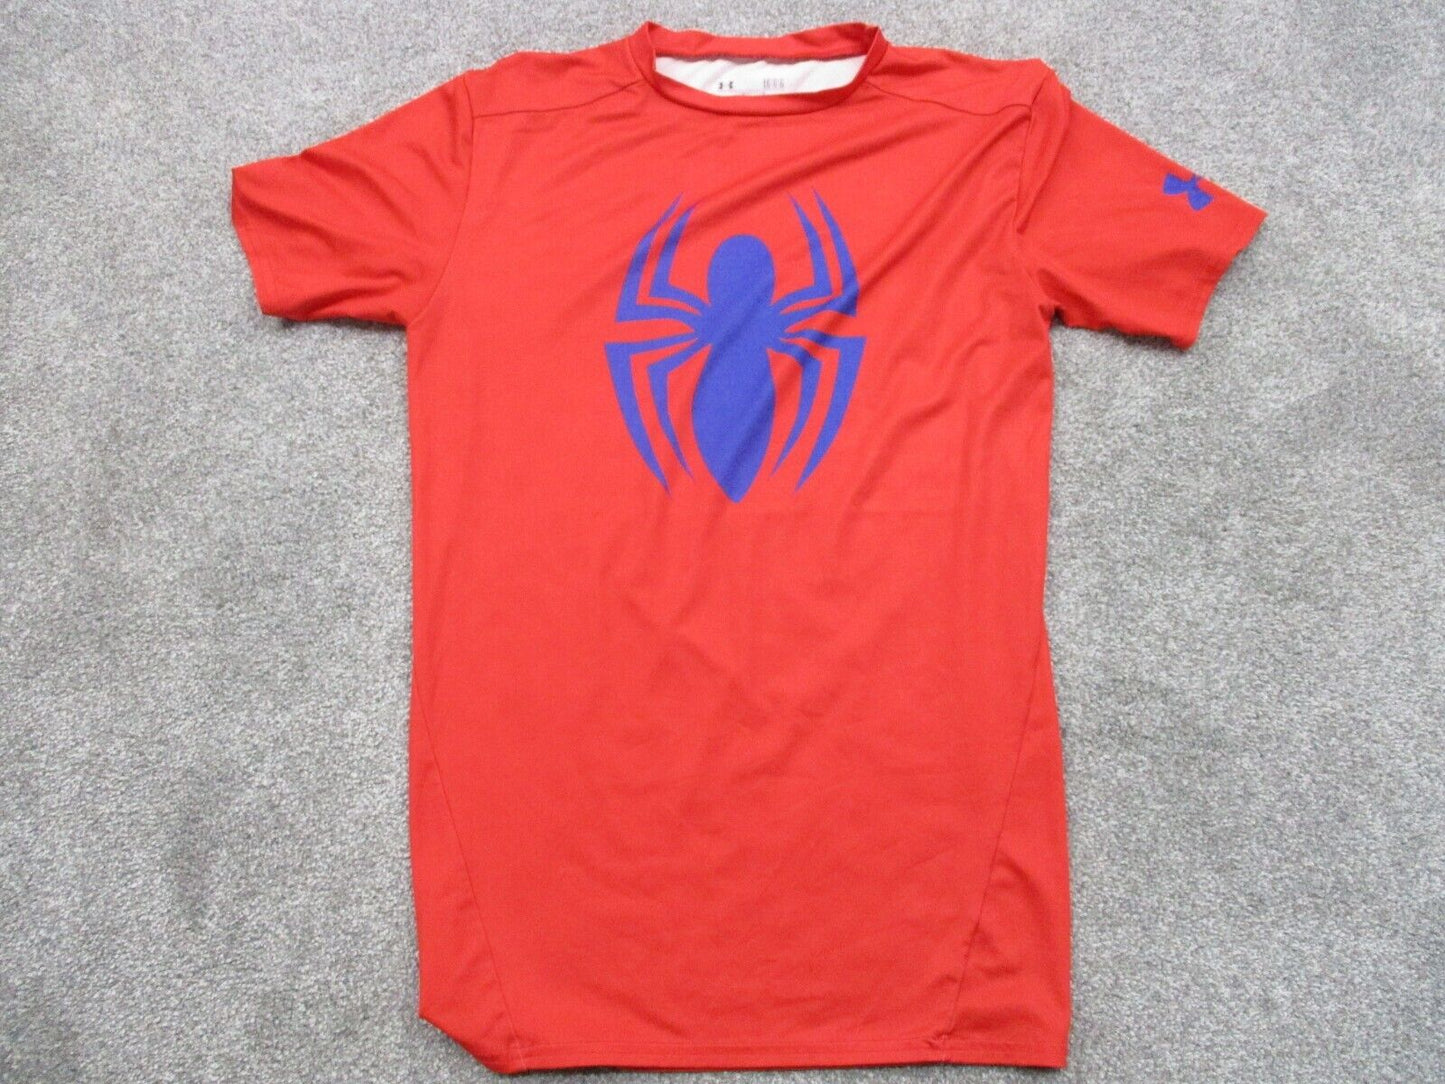 Marvel T Shirt Mens Size Large Red Solid Short Sleeve Spider-Men Graphic Tee